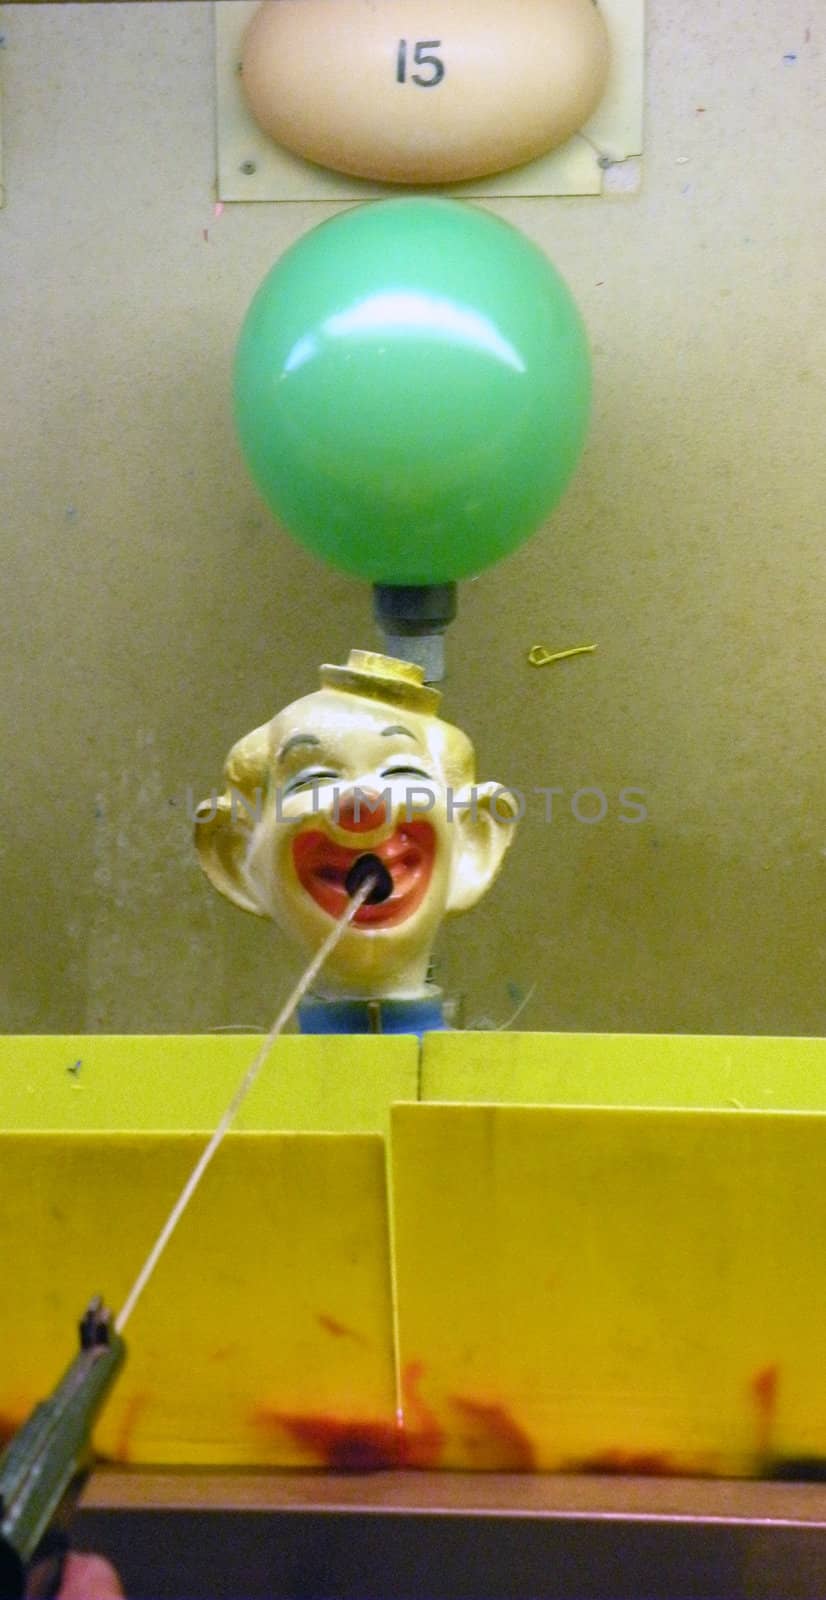 carnival game where you shoot the clown with a water pistol in order to inflate and pop the baloon to win a proze.